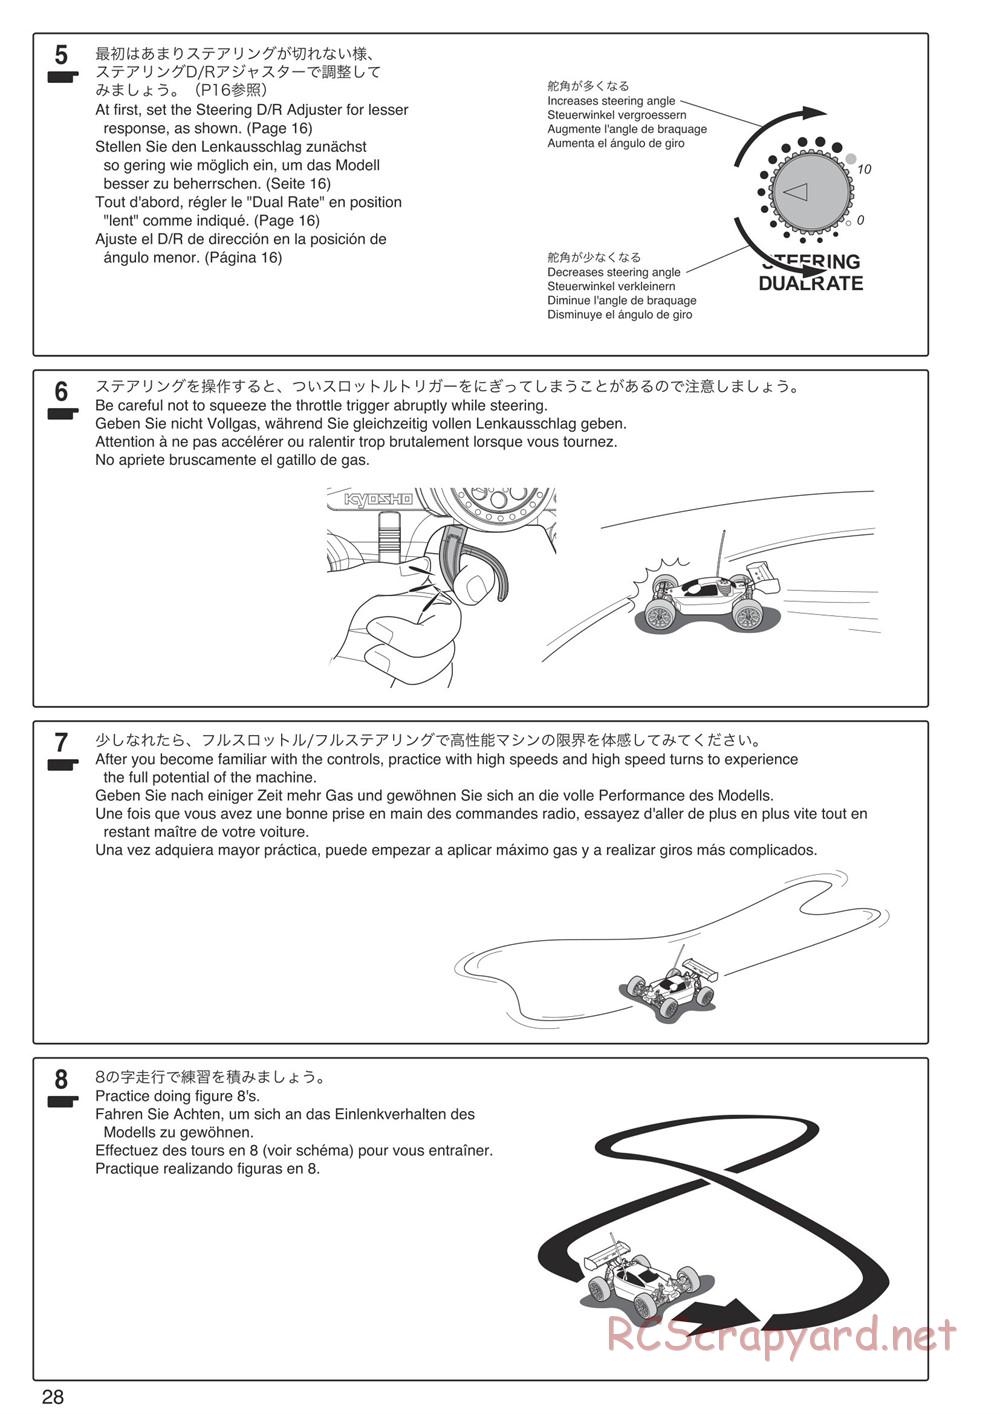 Kyosho - Inferno Neo 3.0 - Manual - Page 28